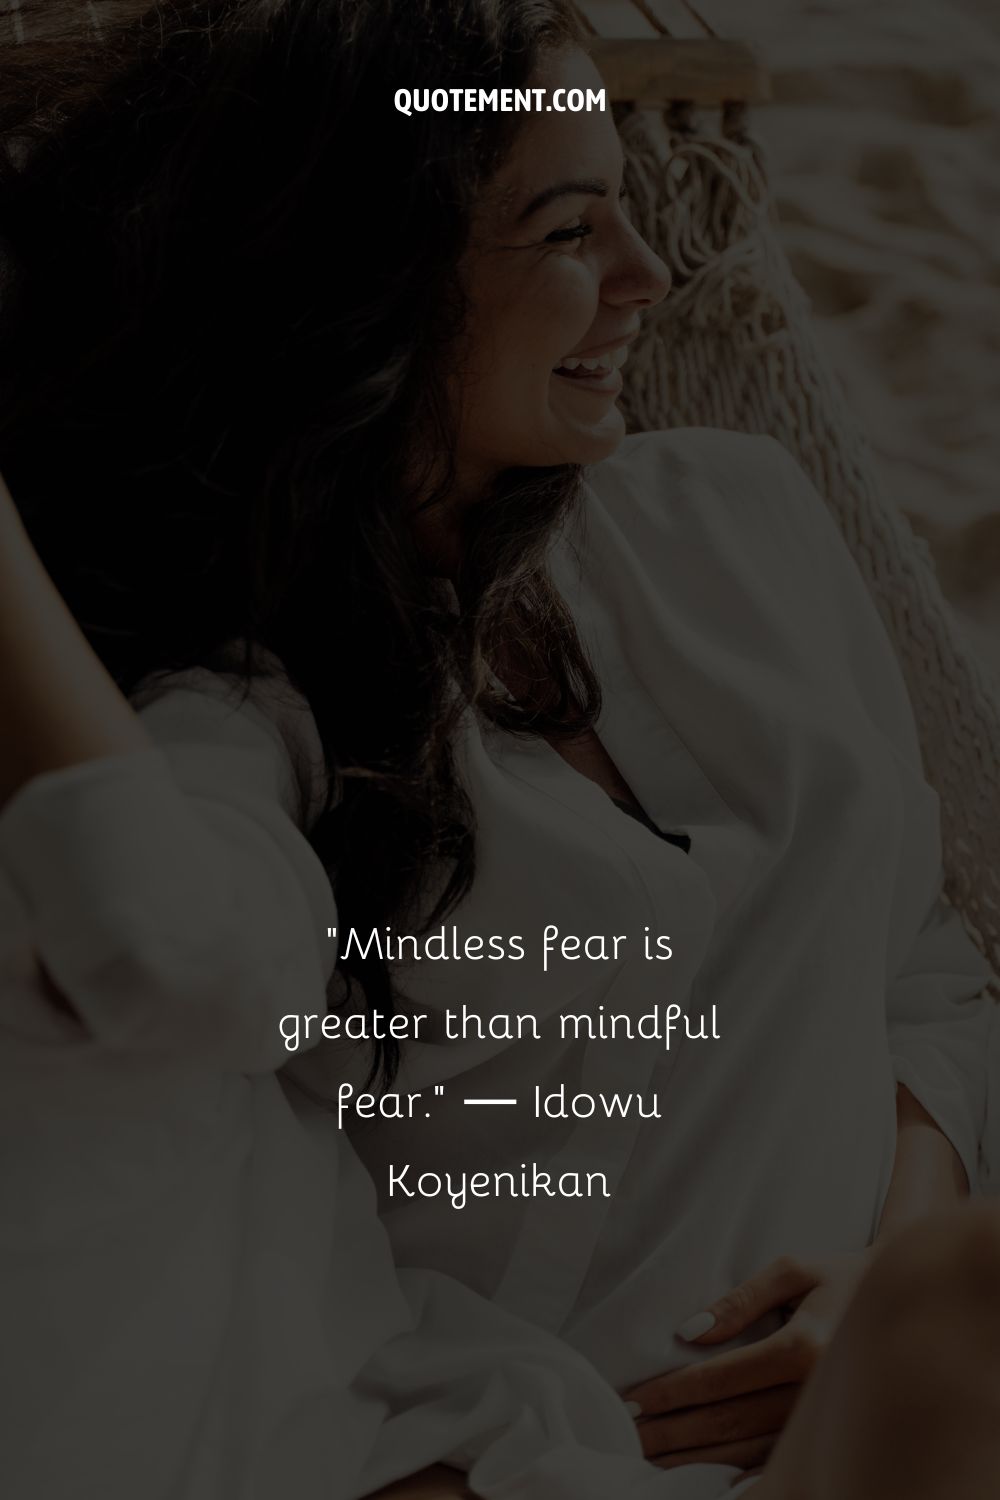 Mindless fear is greater than mindful fear.